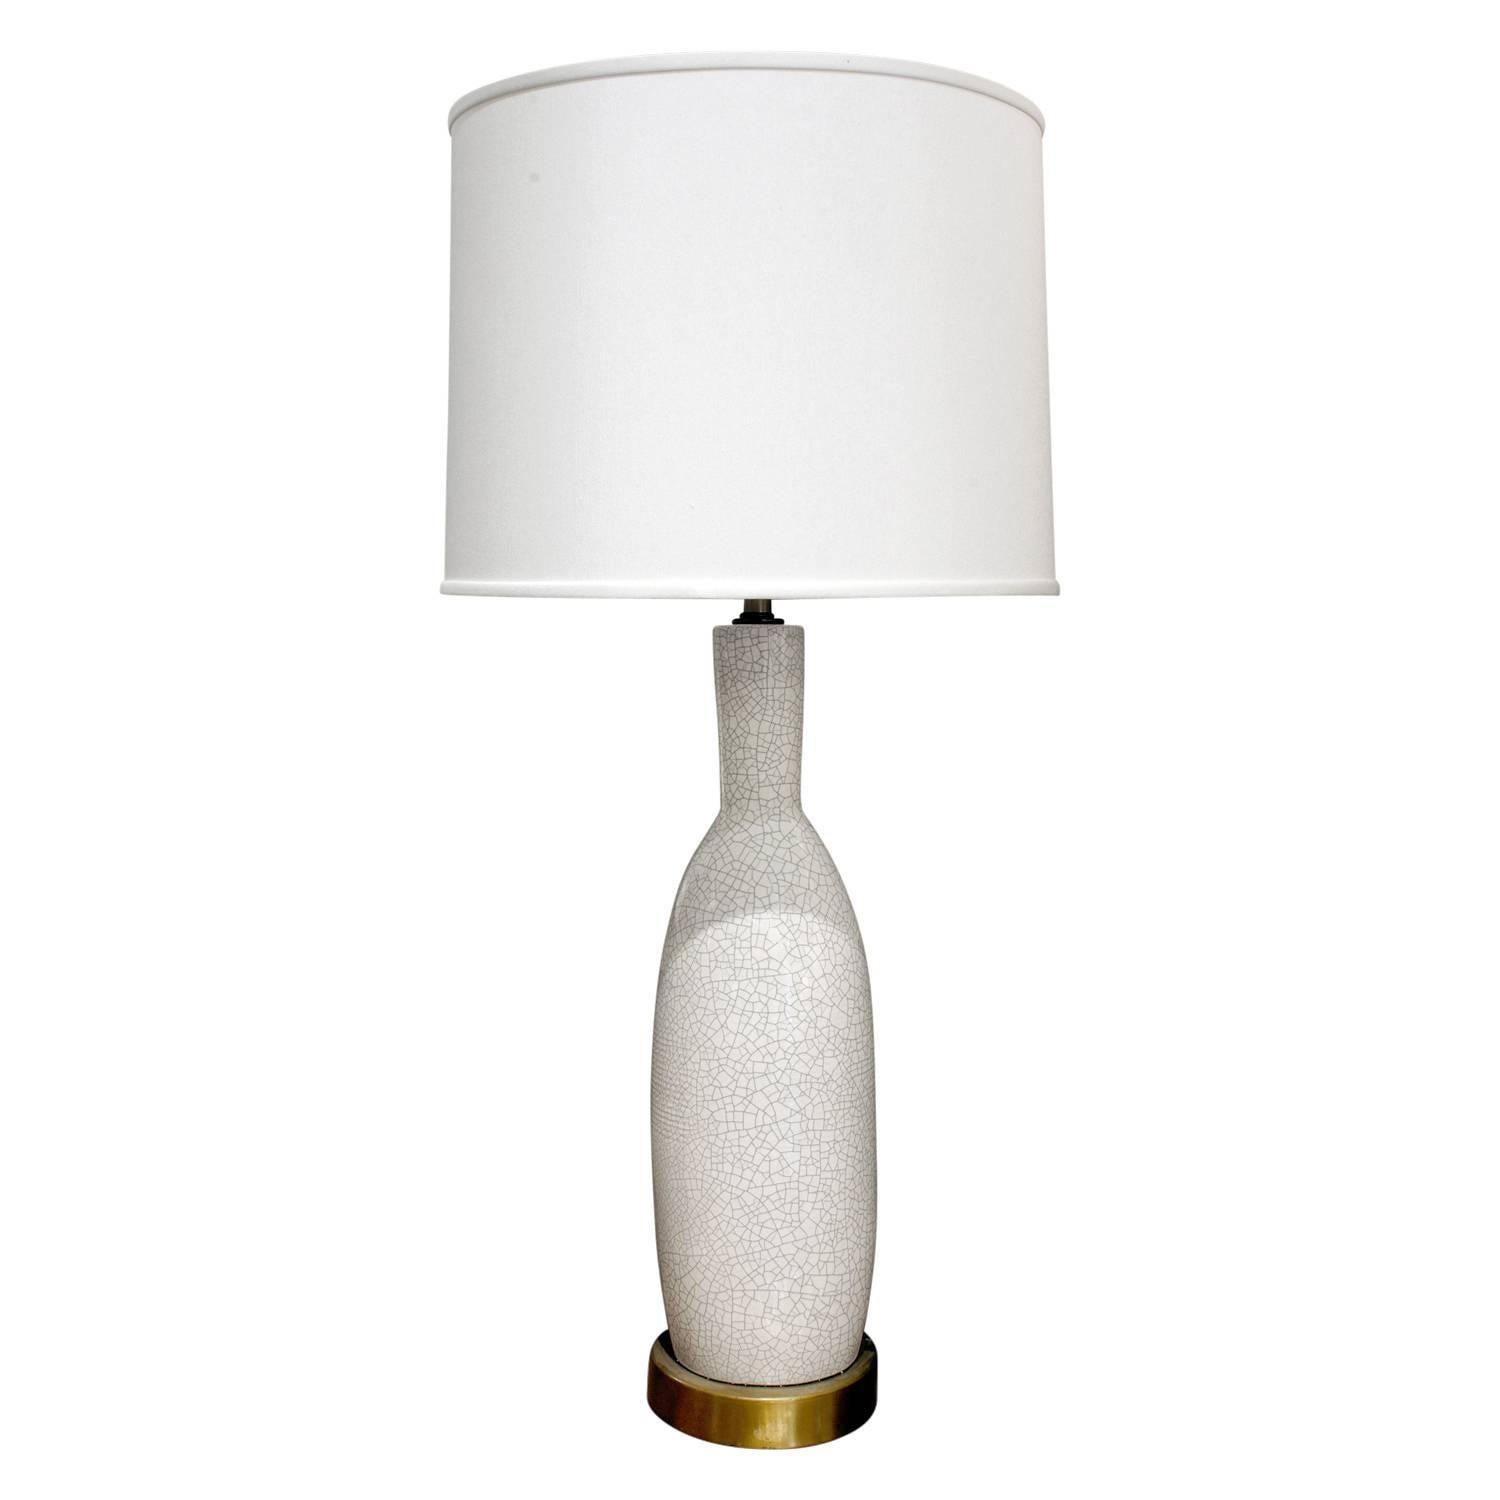 Large White Porcelain Table Lamp with Craquele Glaze, 1960s